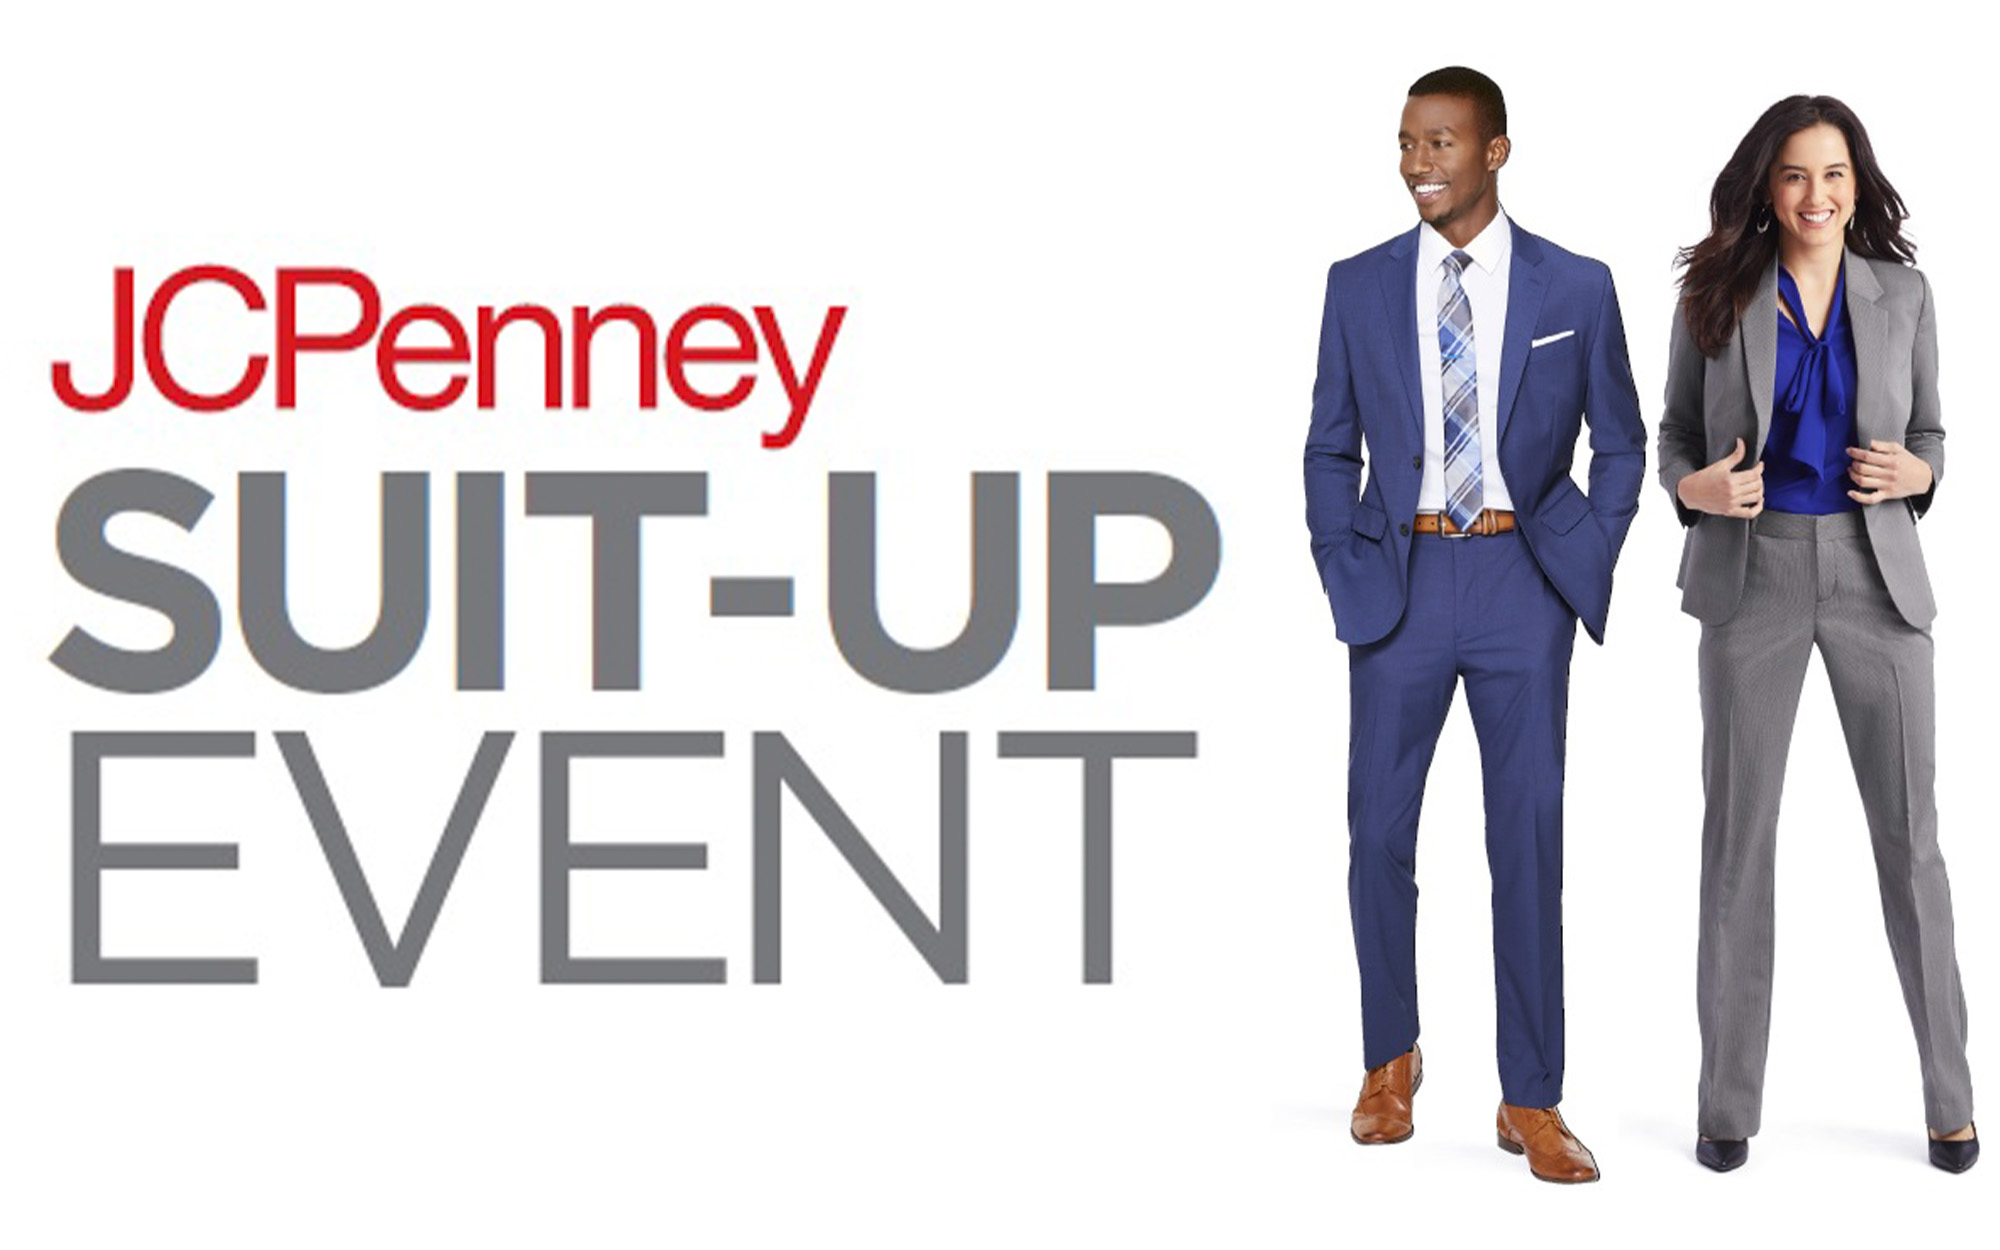 jcpenney suit up event with a male and a female standing, wearing suits